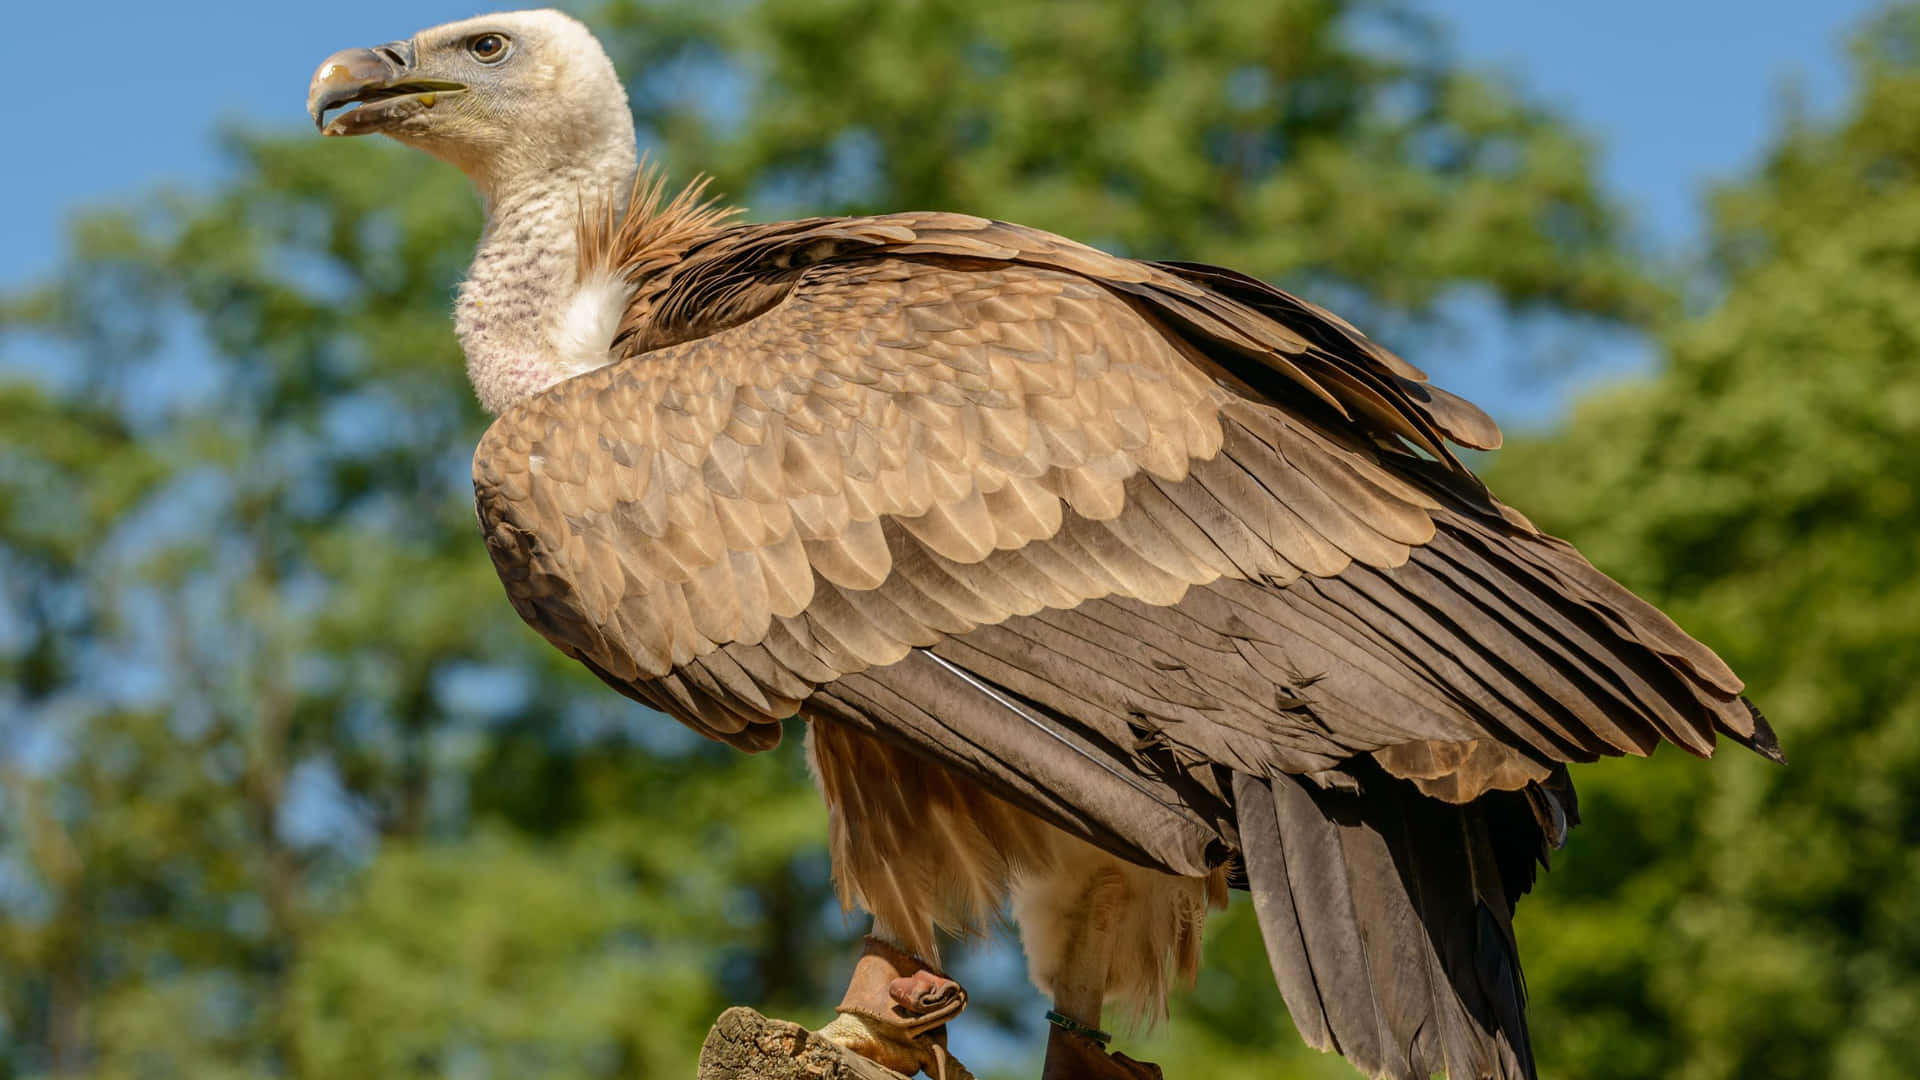 Majestic Vulture Perched Outdoors.jpg Wallpaper